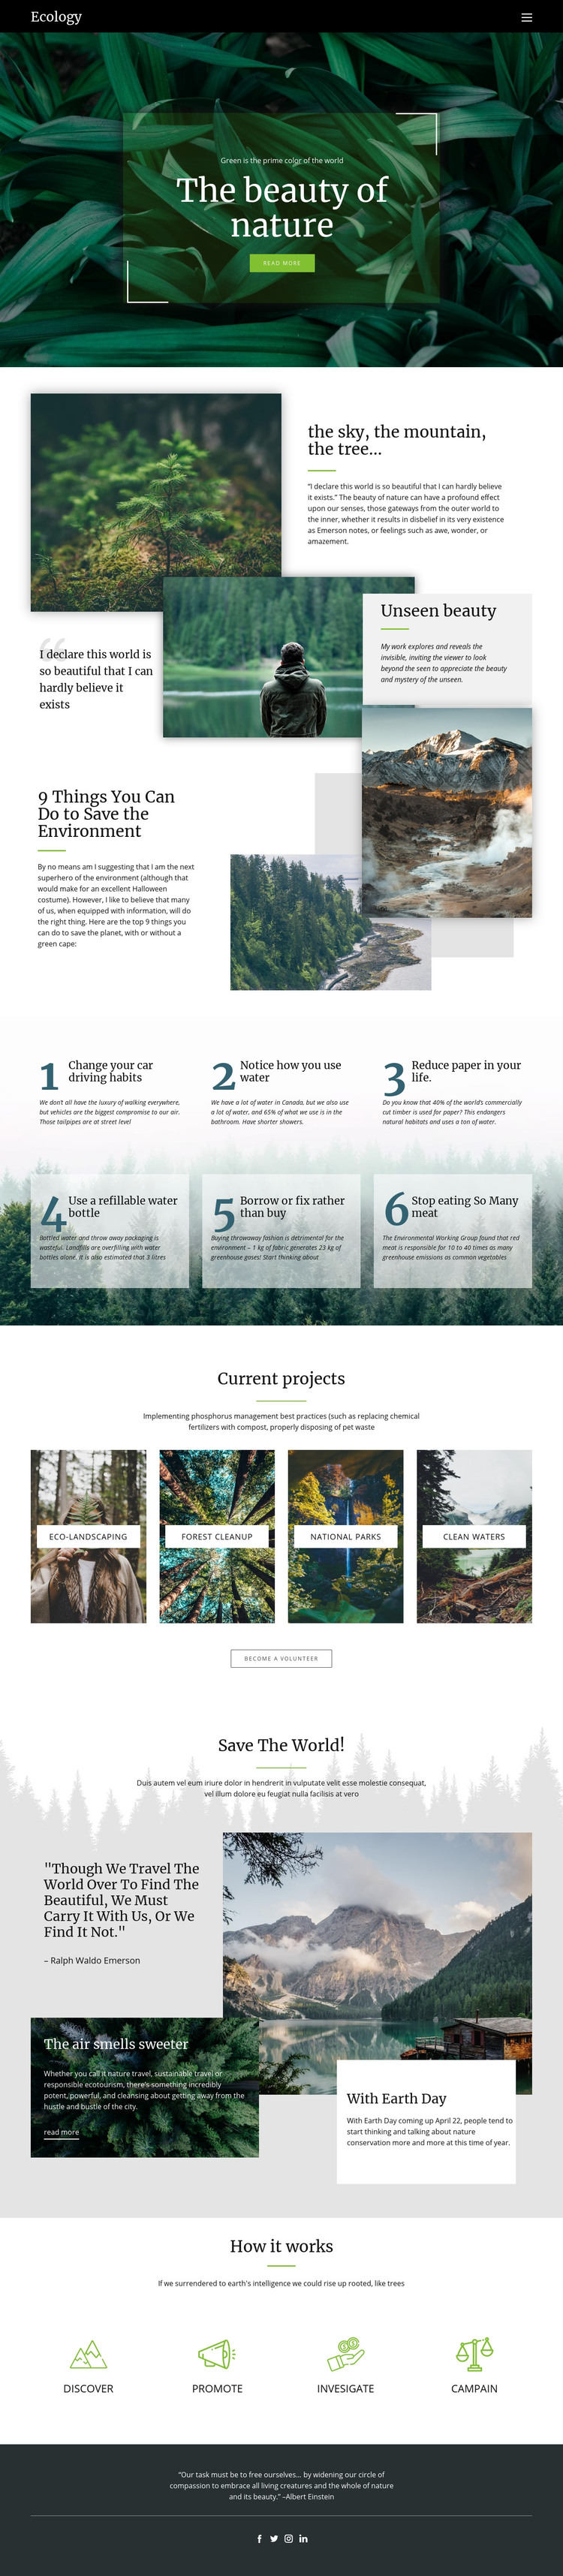 Skies and beauty of nature Homepage Design